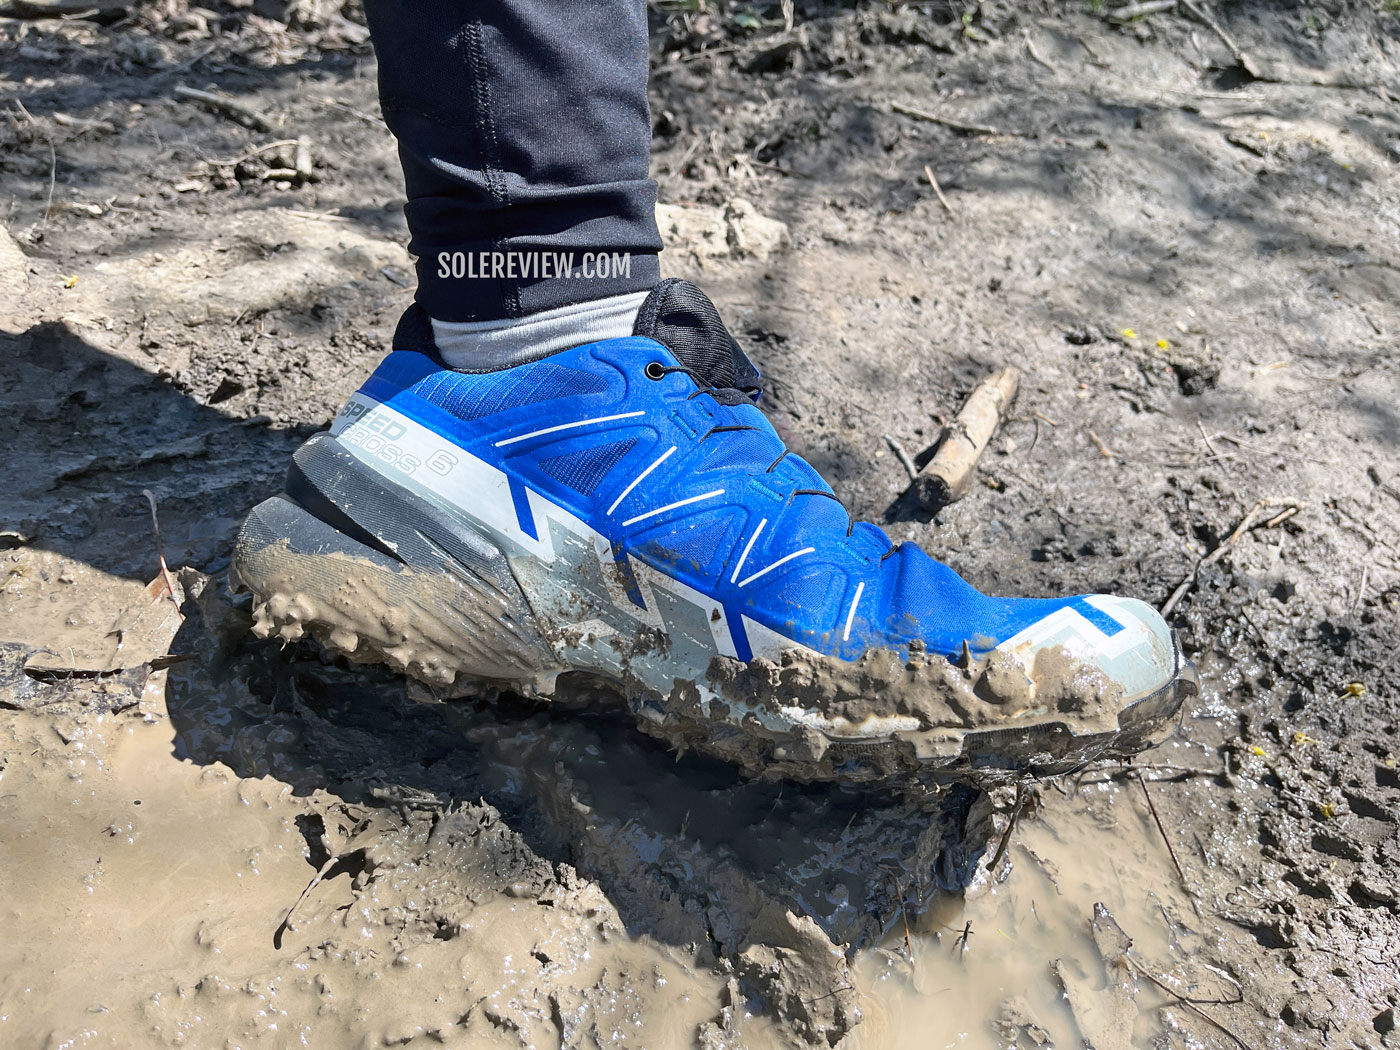 Revival Kabelbane anspore The best waterproof trail running shoes